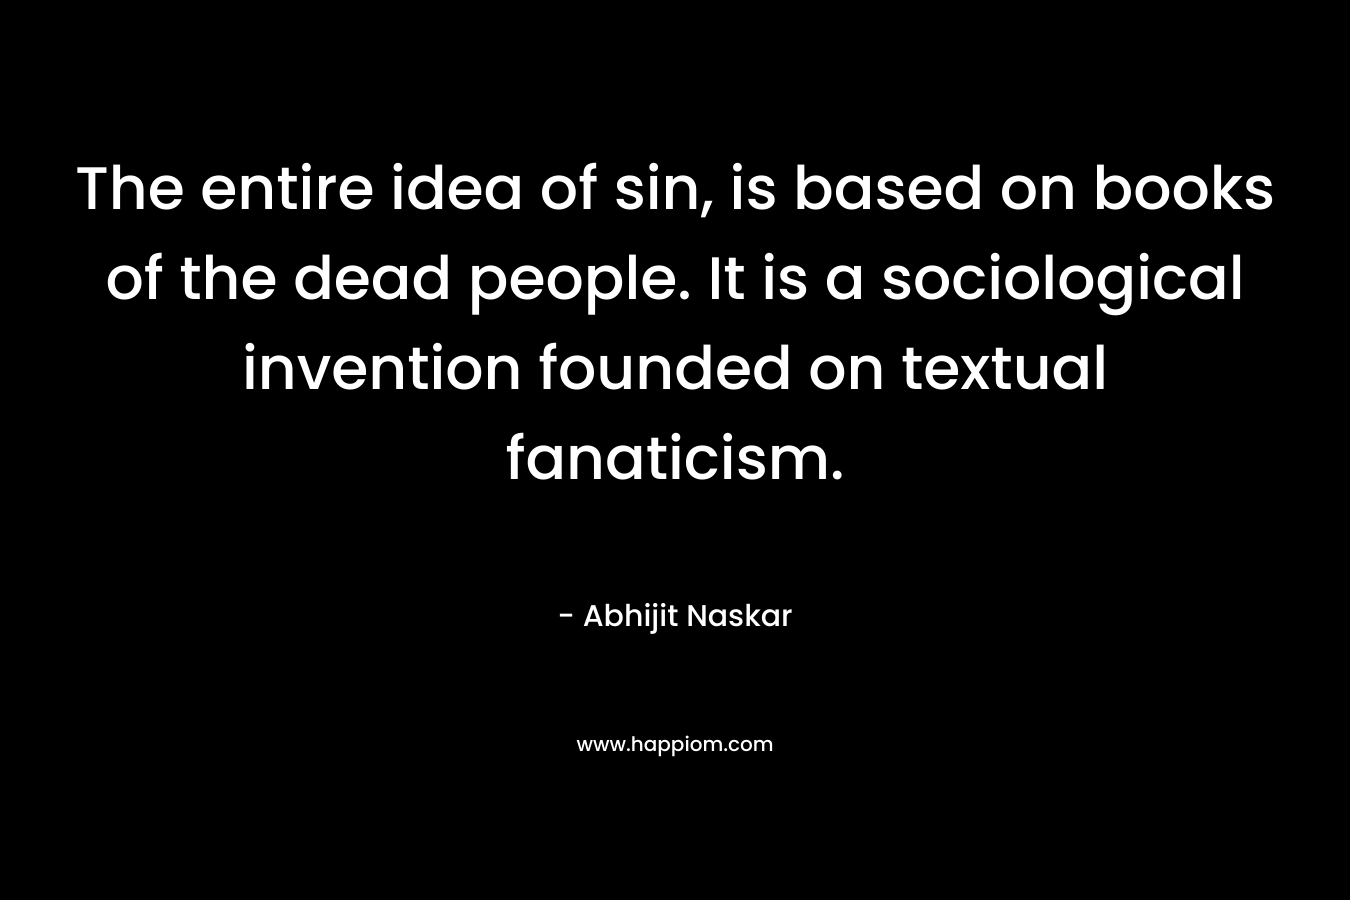 The entire idea of sin, is based on books of the dead people. It is a sociological invention founded on textual fanaticism. – Abhijit Naskar